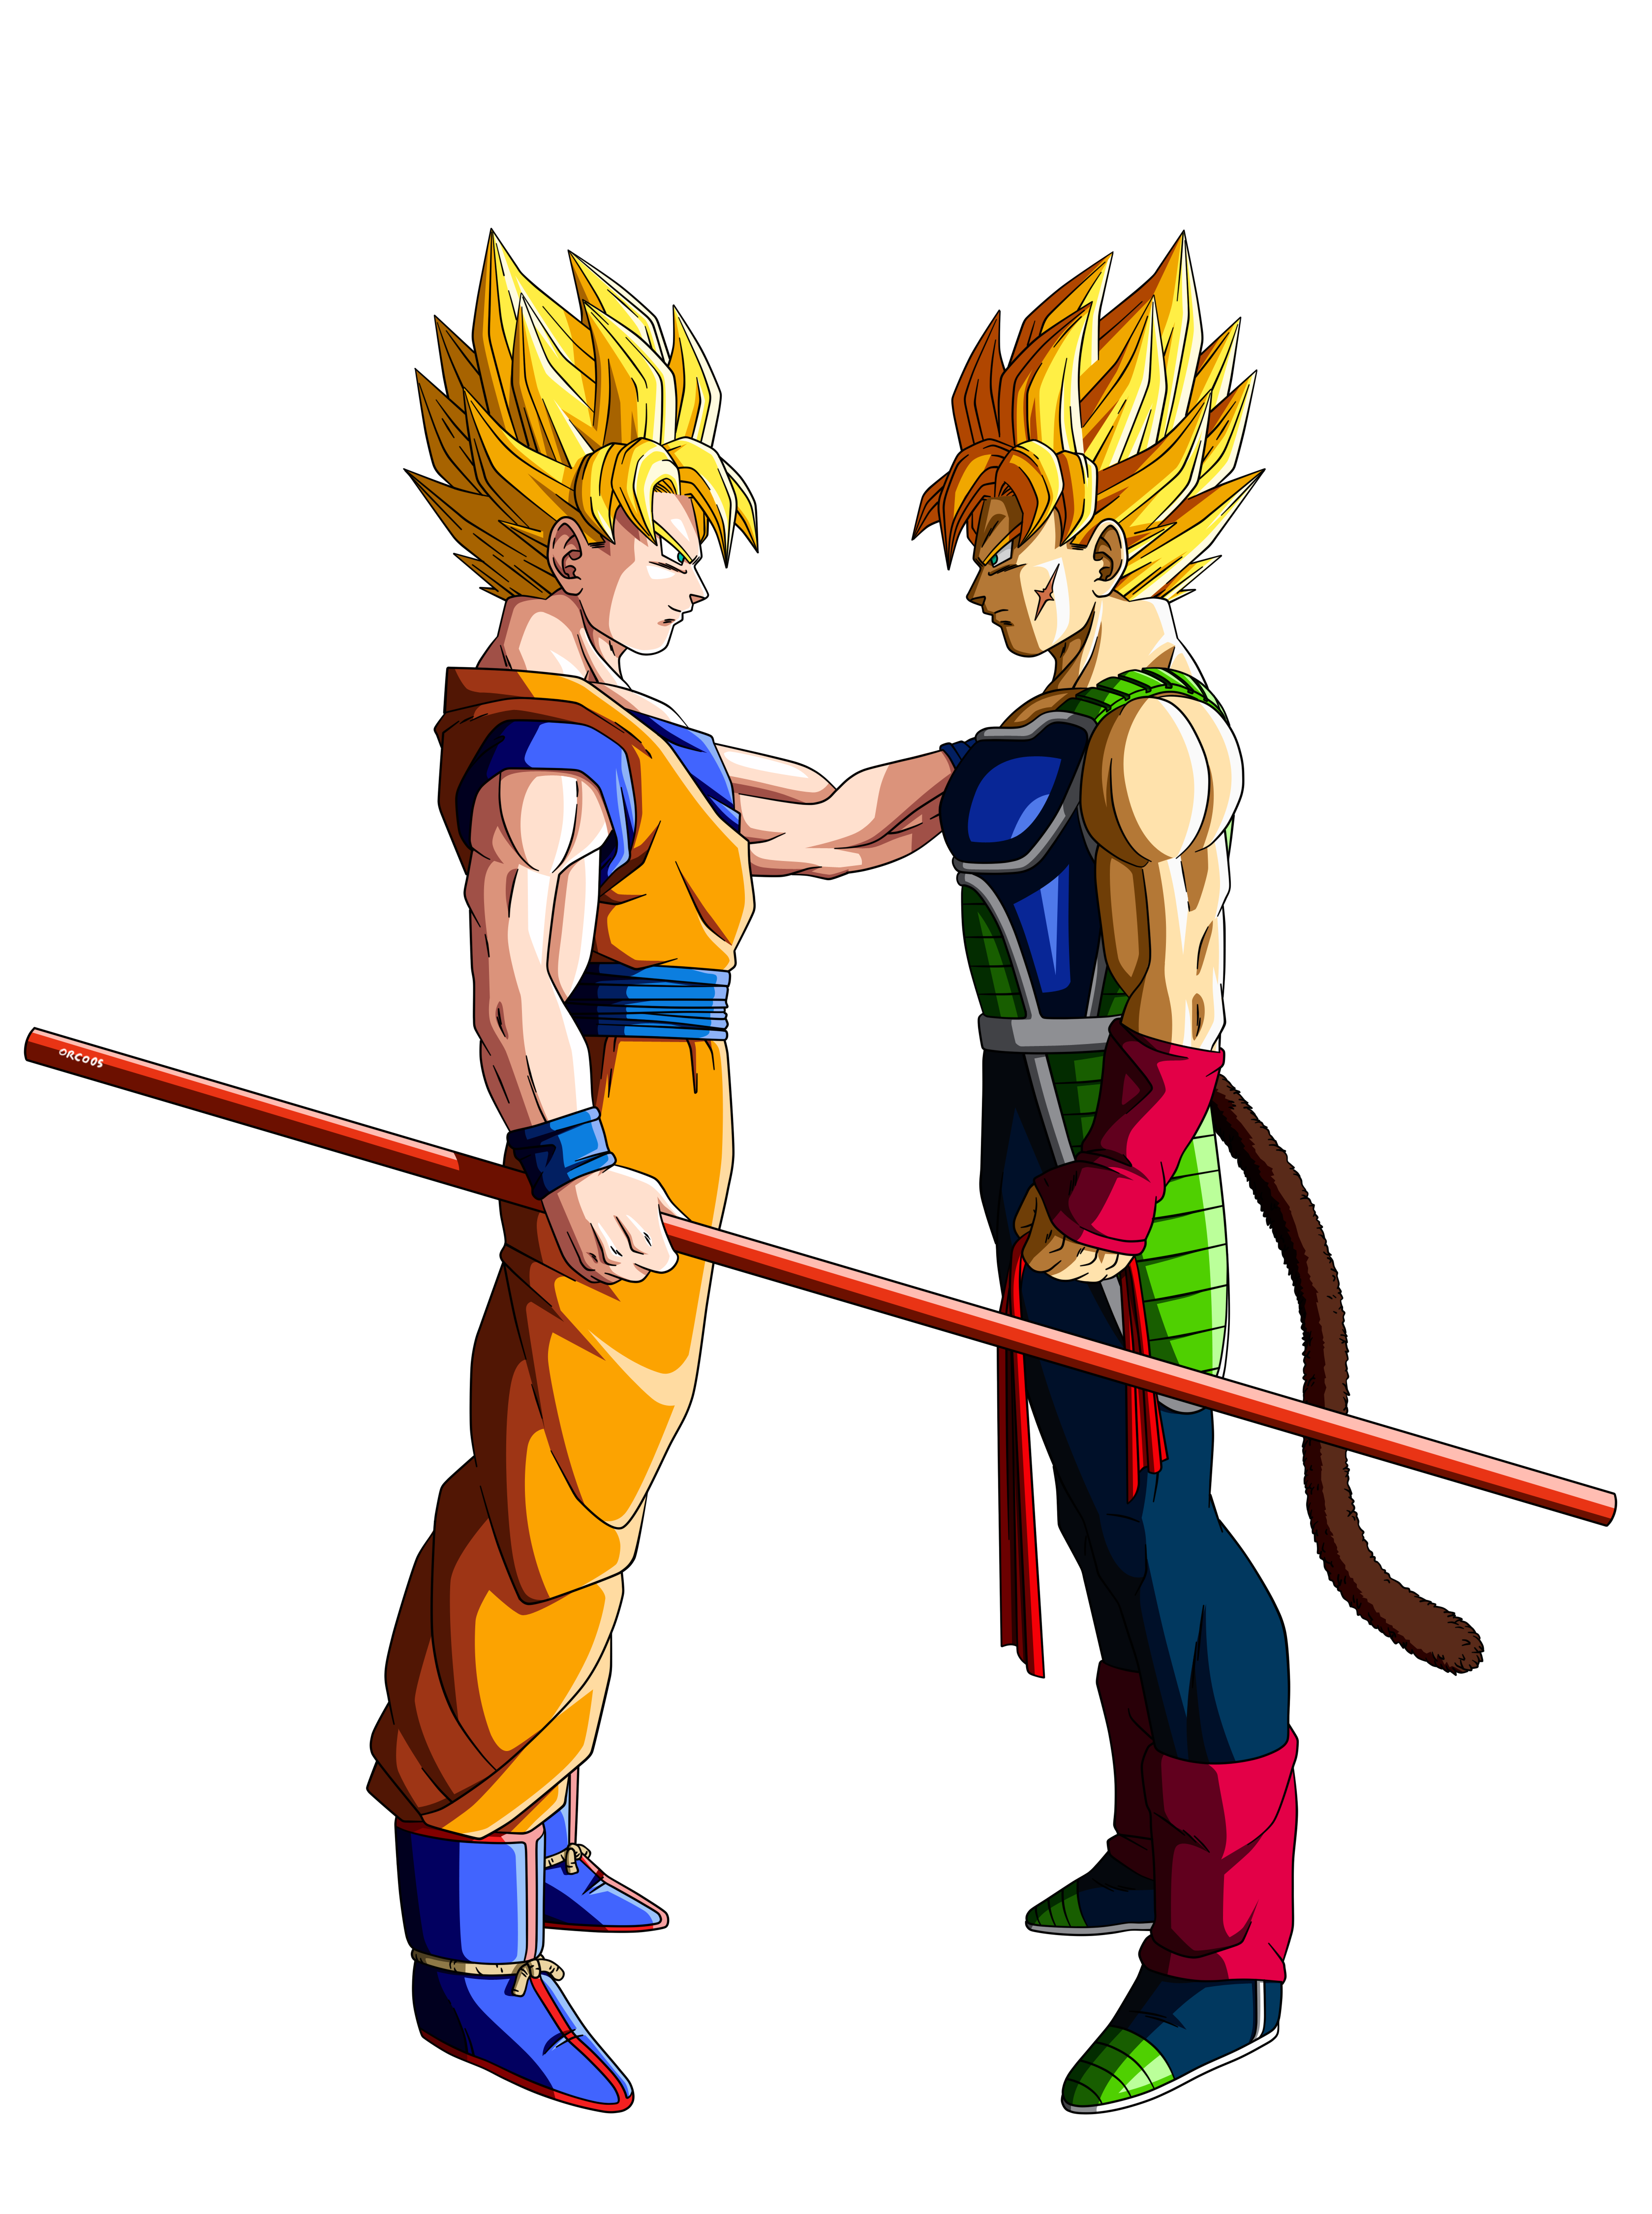 Son Goku and Bardock by orco05 on DeviantArt